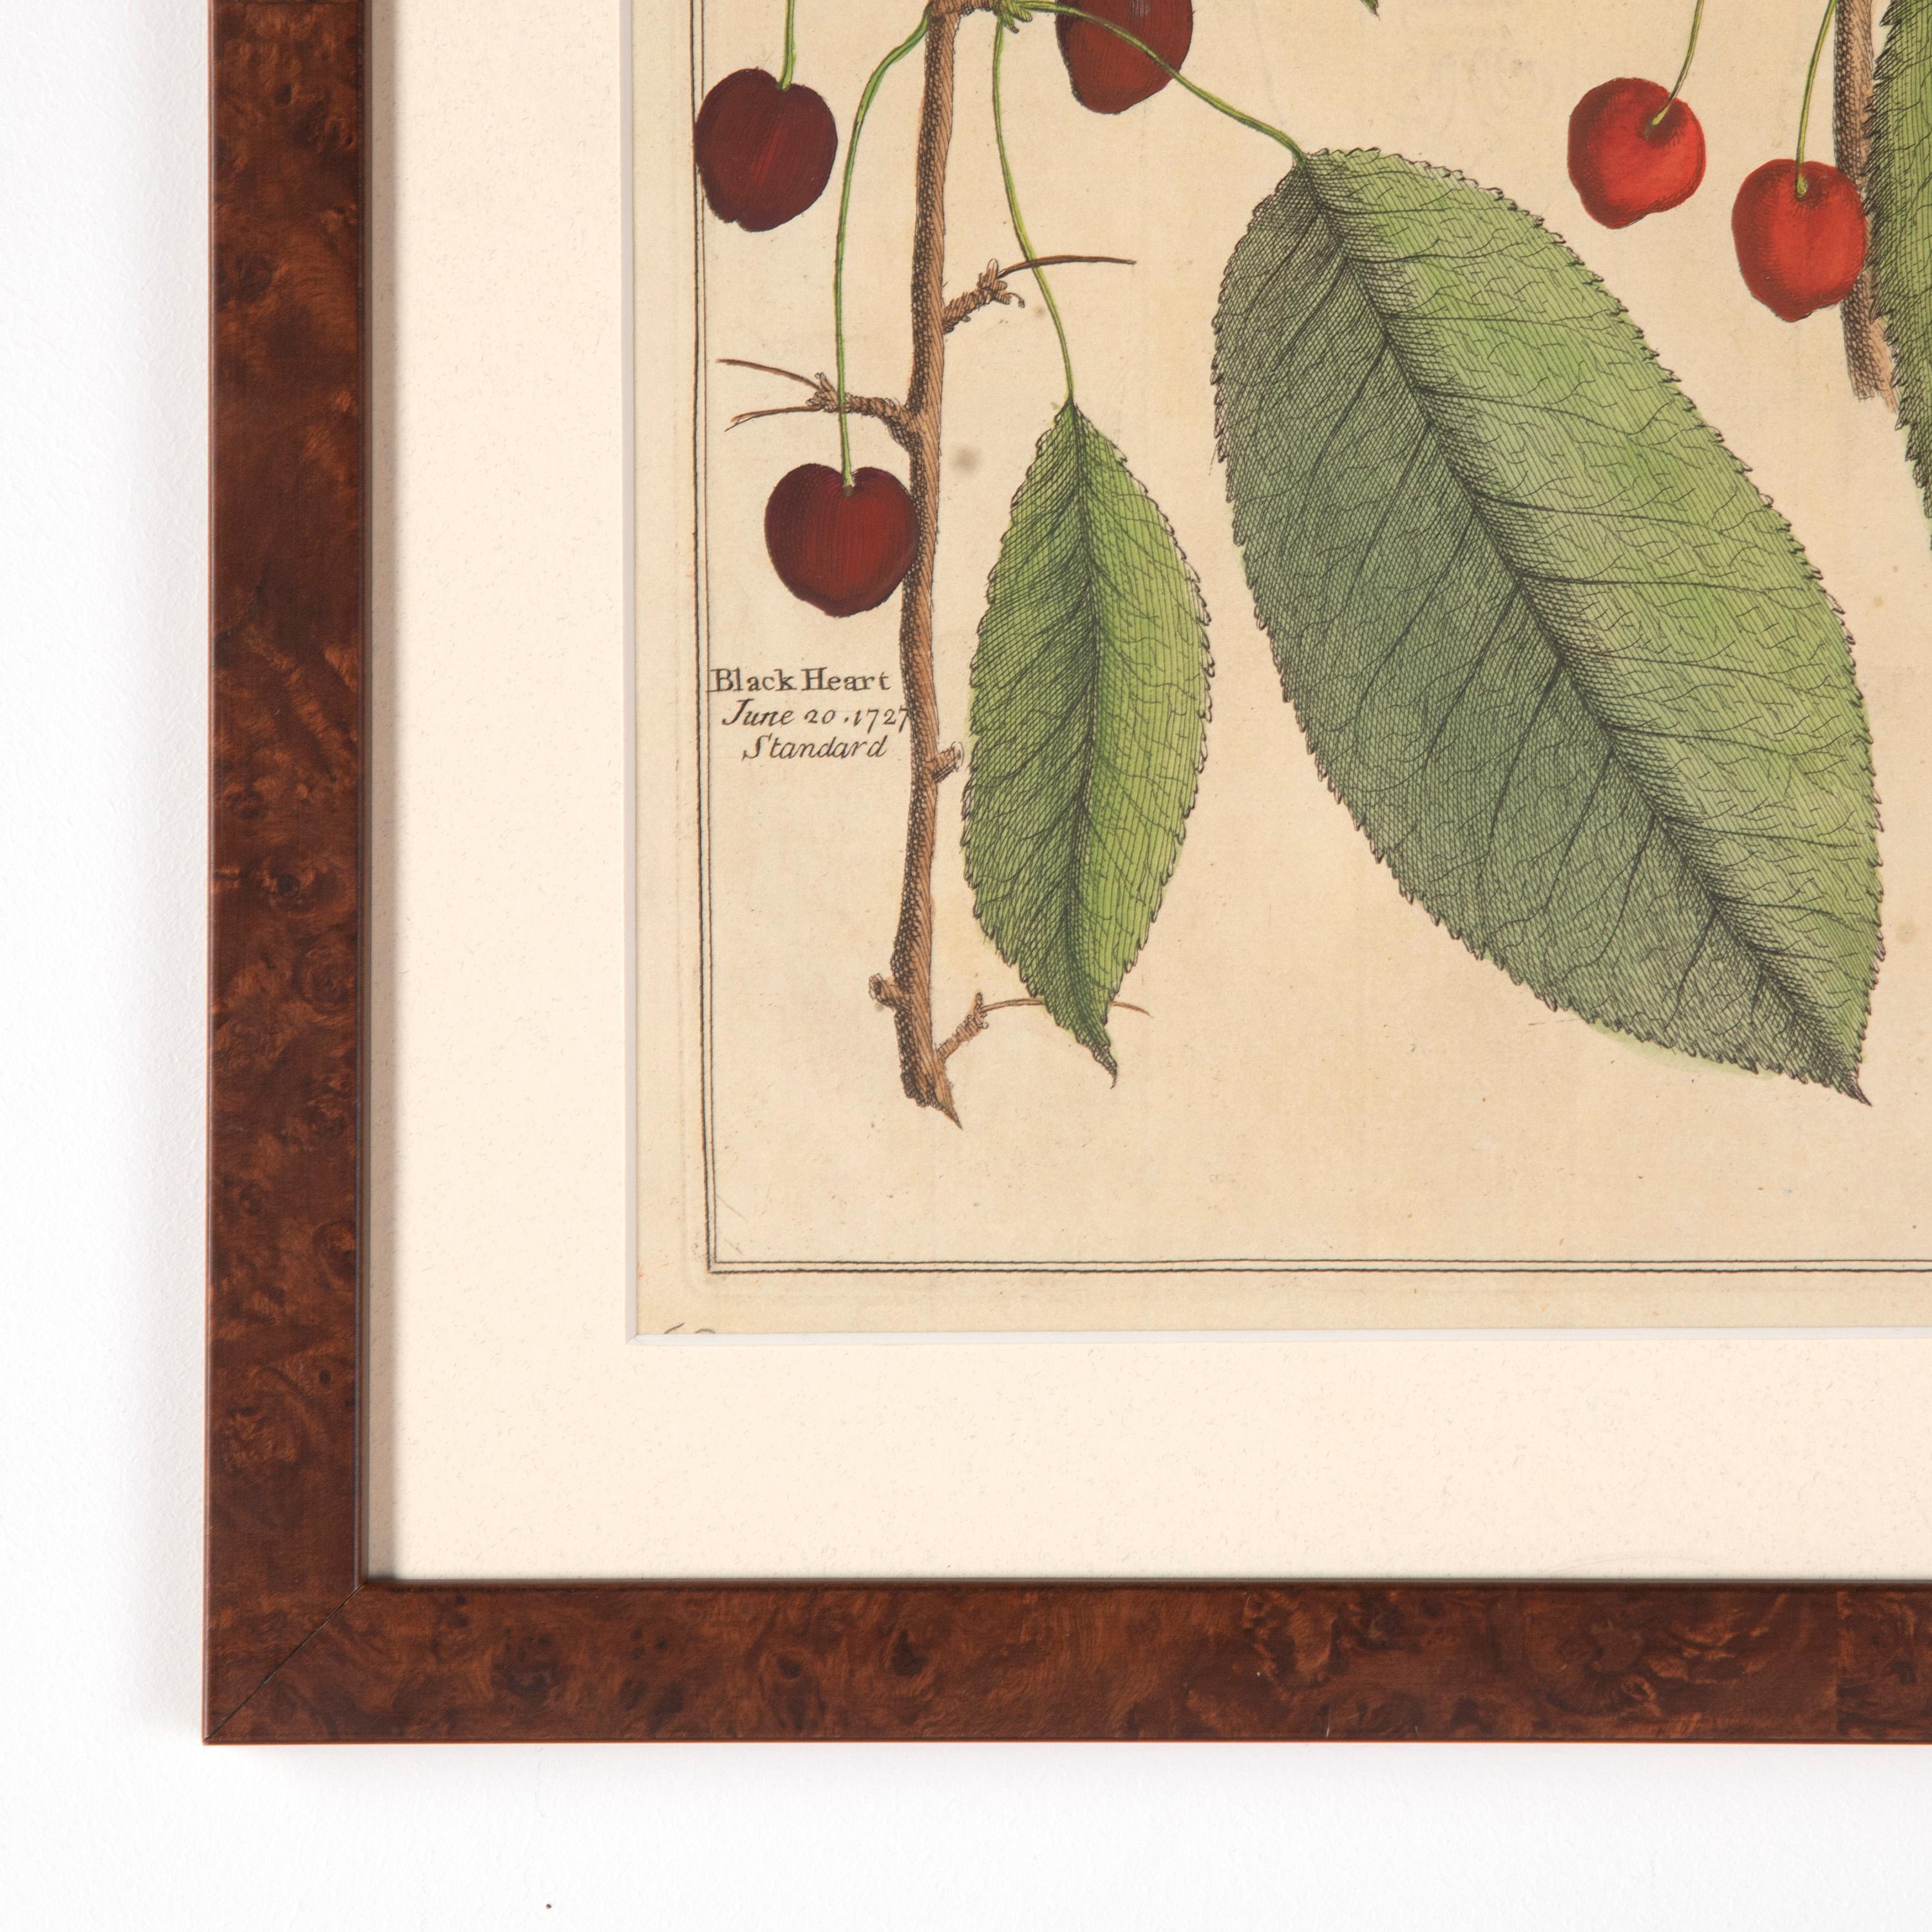 Set of four 18th century fruit prints by Batty Langley.

Presented in walnut veneer frames with off-white mounts and AR70 art glass. 

These engravings are hard to come by and are enormously decorative.